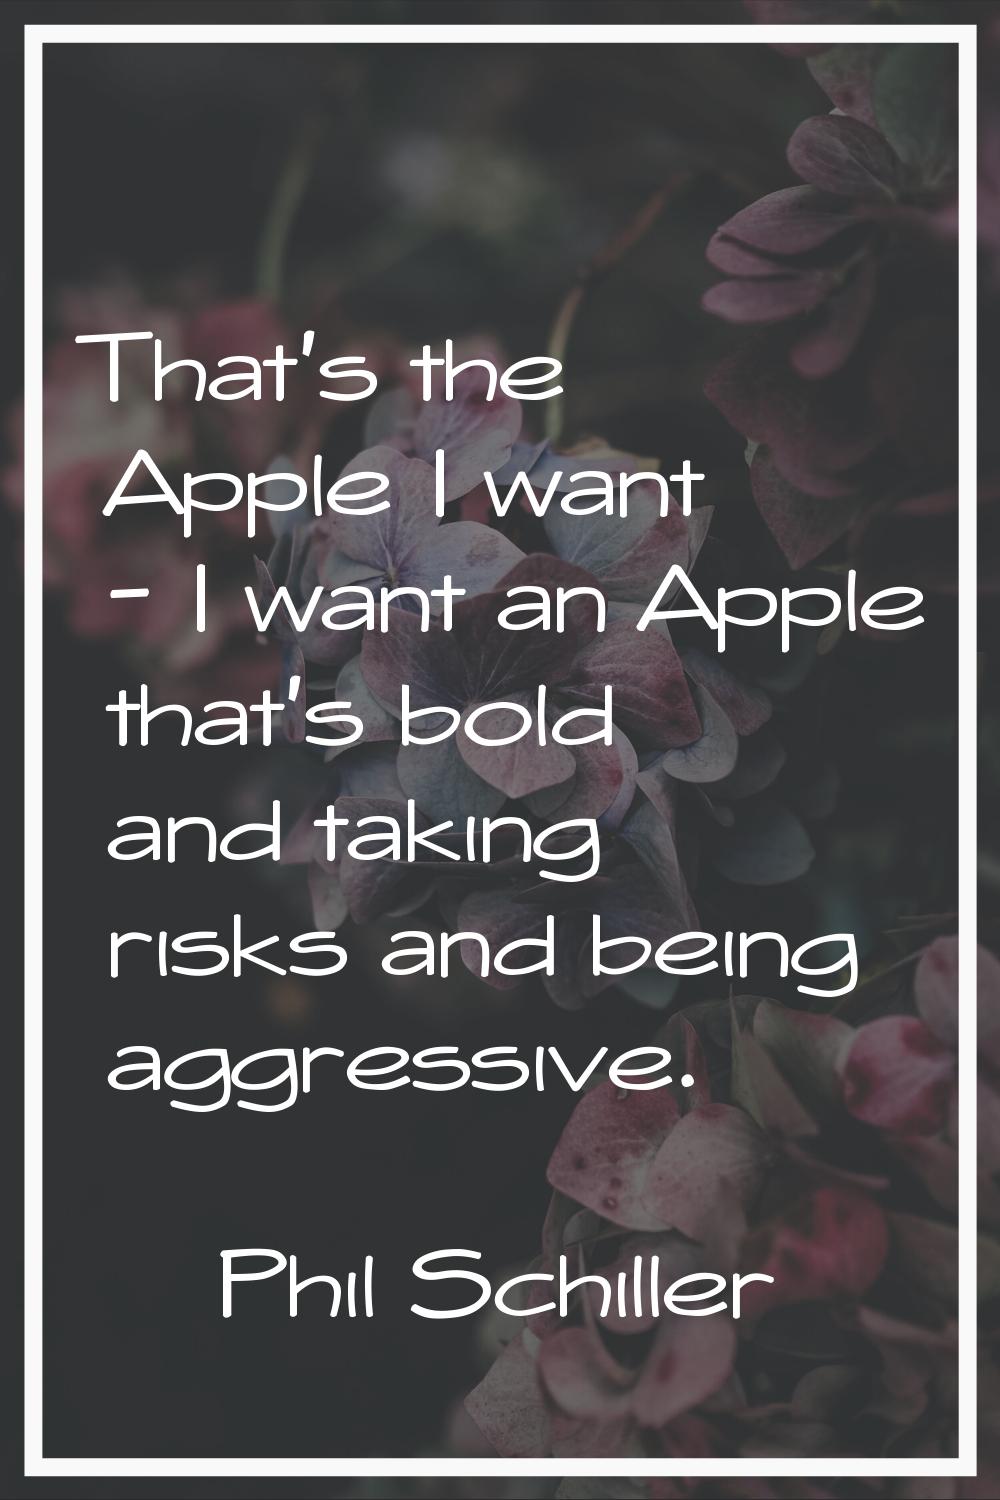 That's the Apple I want - I want an Apple that's bold and taking risks and being aggressive.